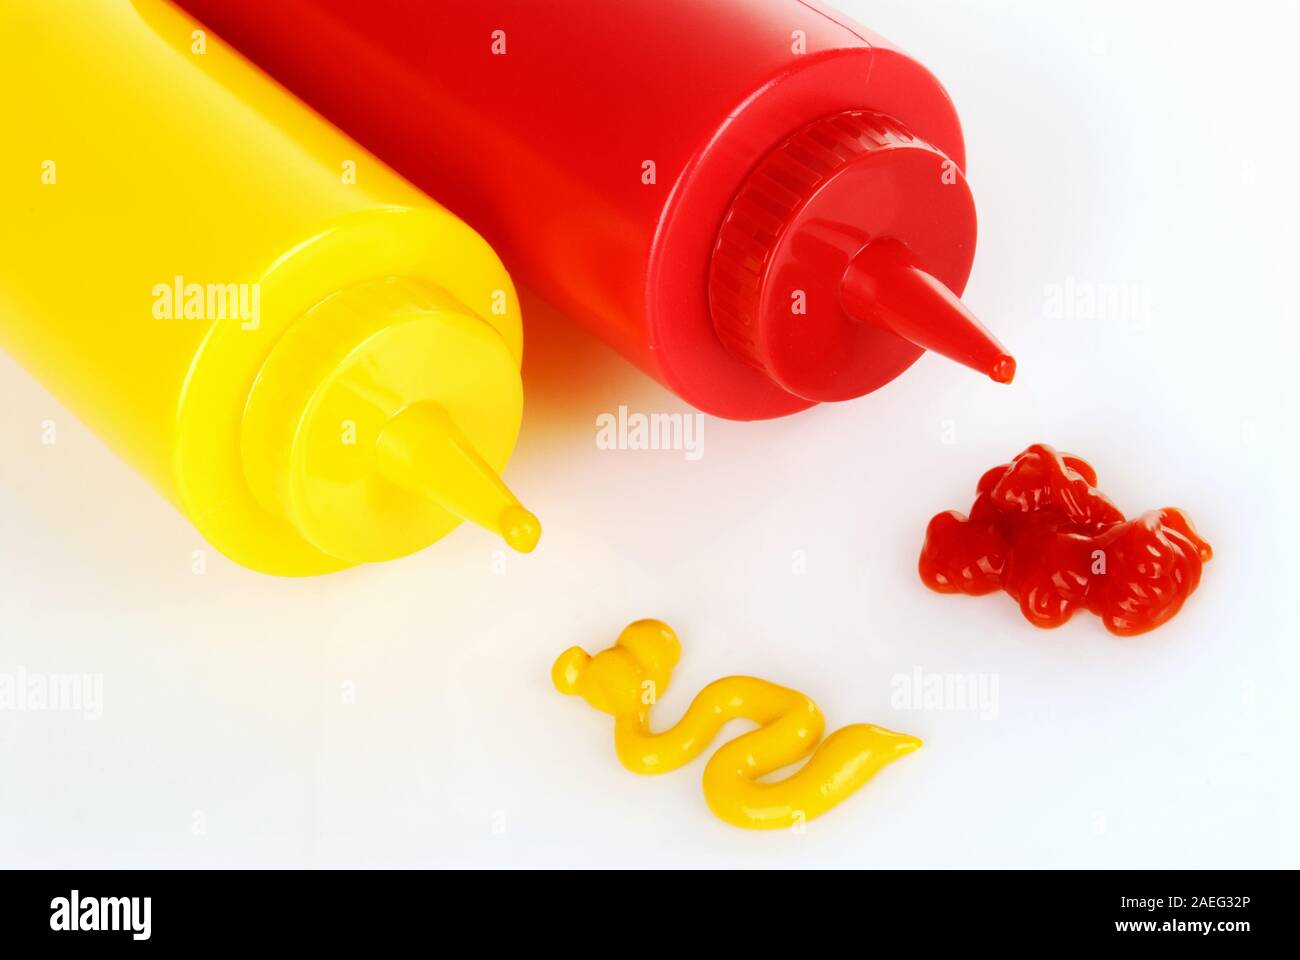 yellow plastic mustard bottle and a red plastic ketchup bottle are side by side. Each bottle has a swirly squirt of matching condiments. Stock Photo